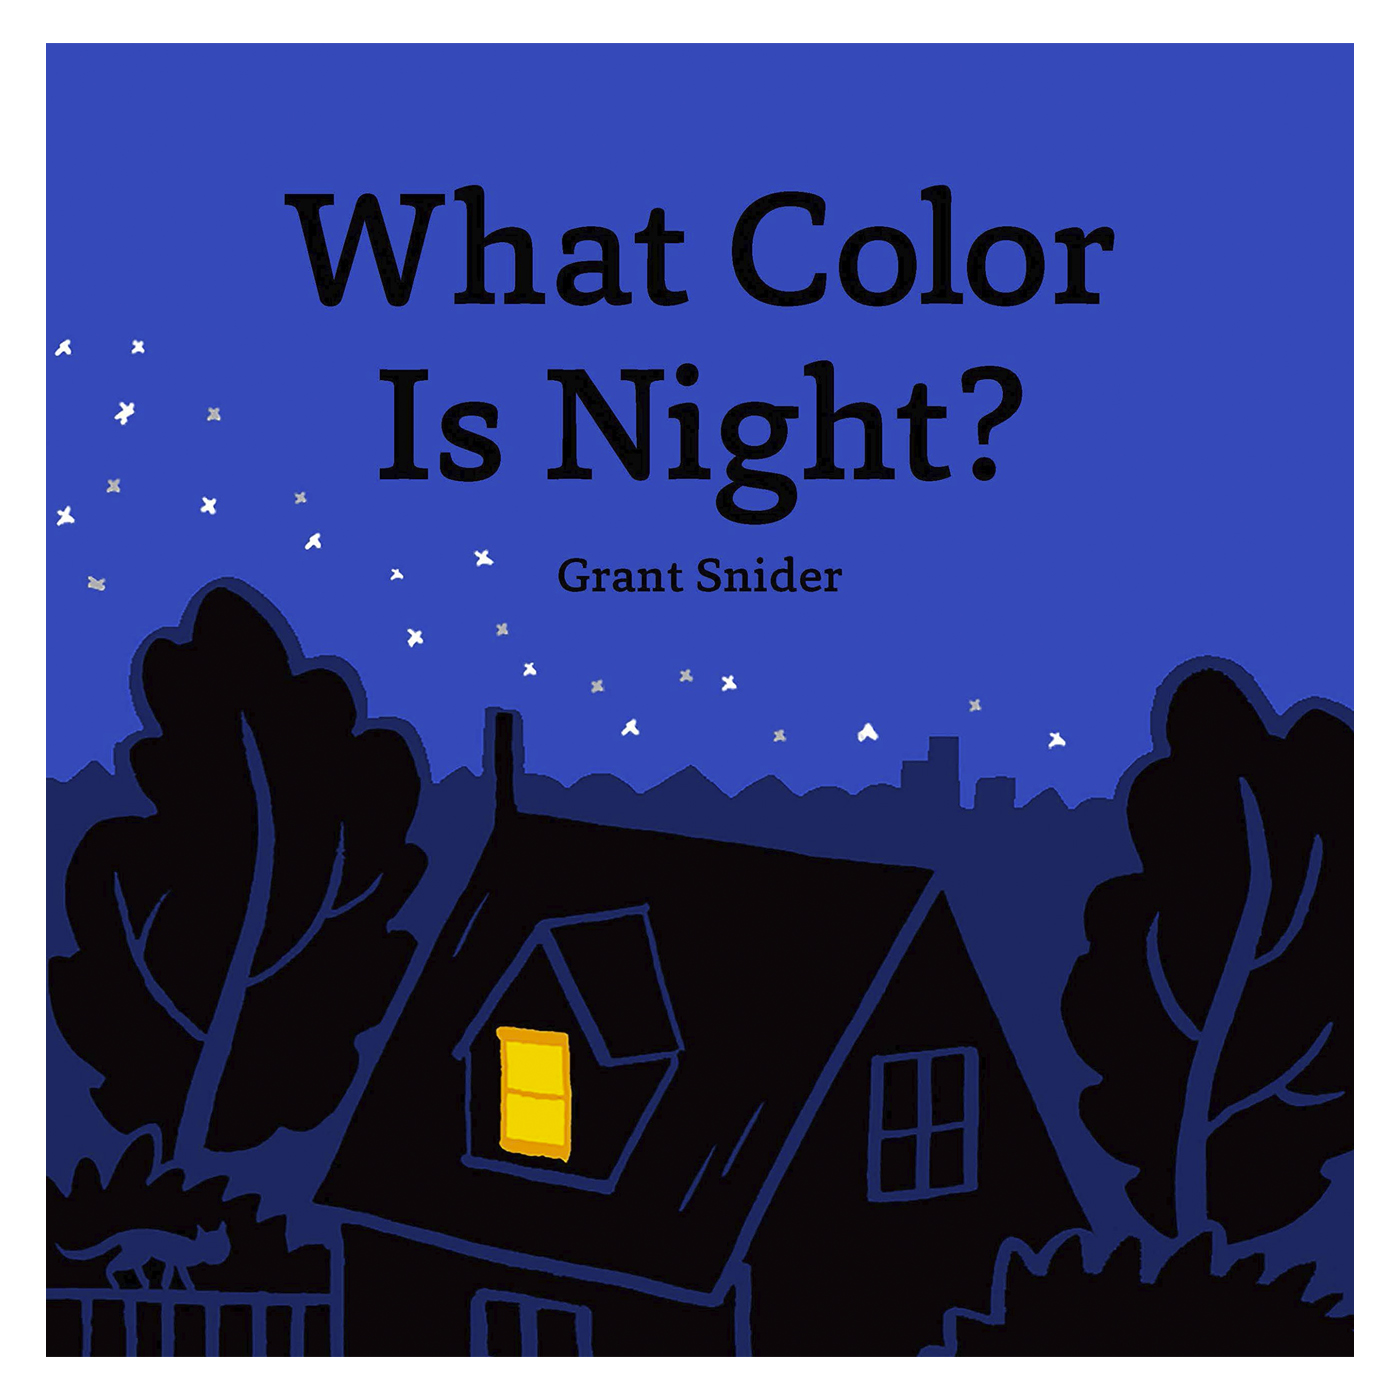  What Color Is Night?